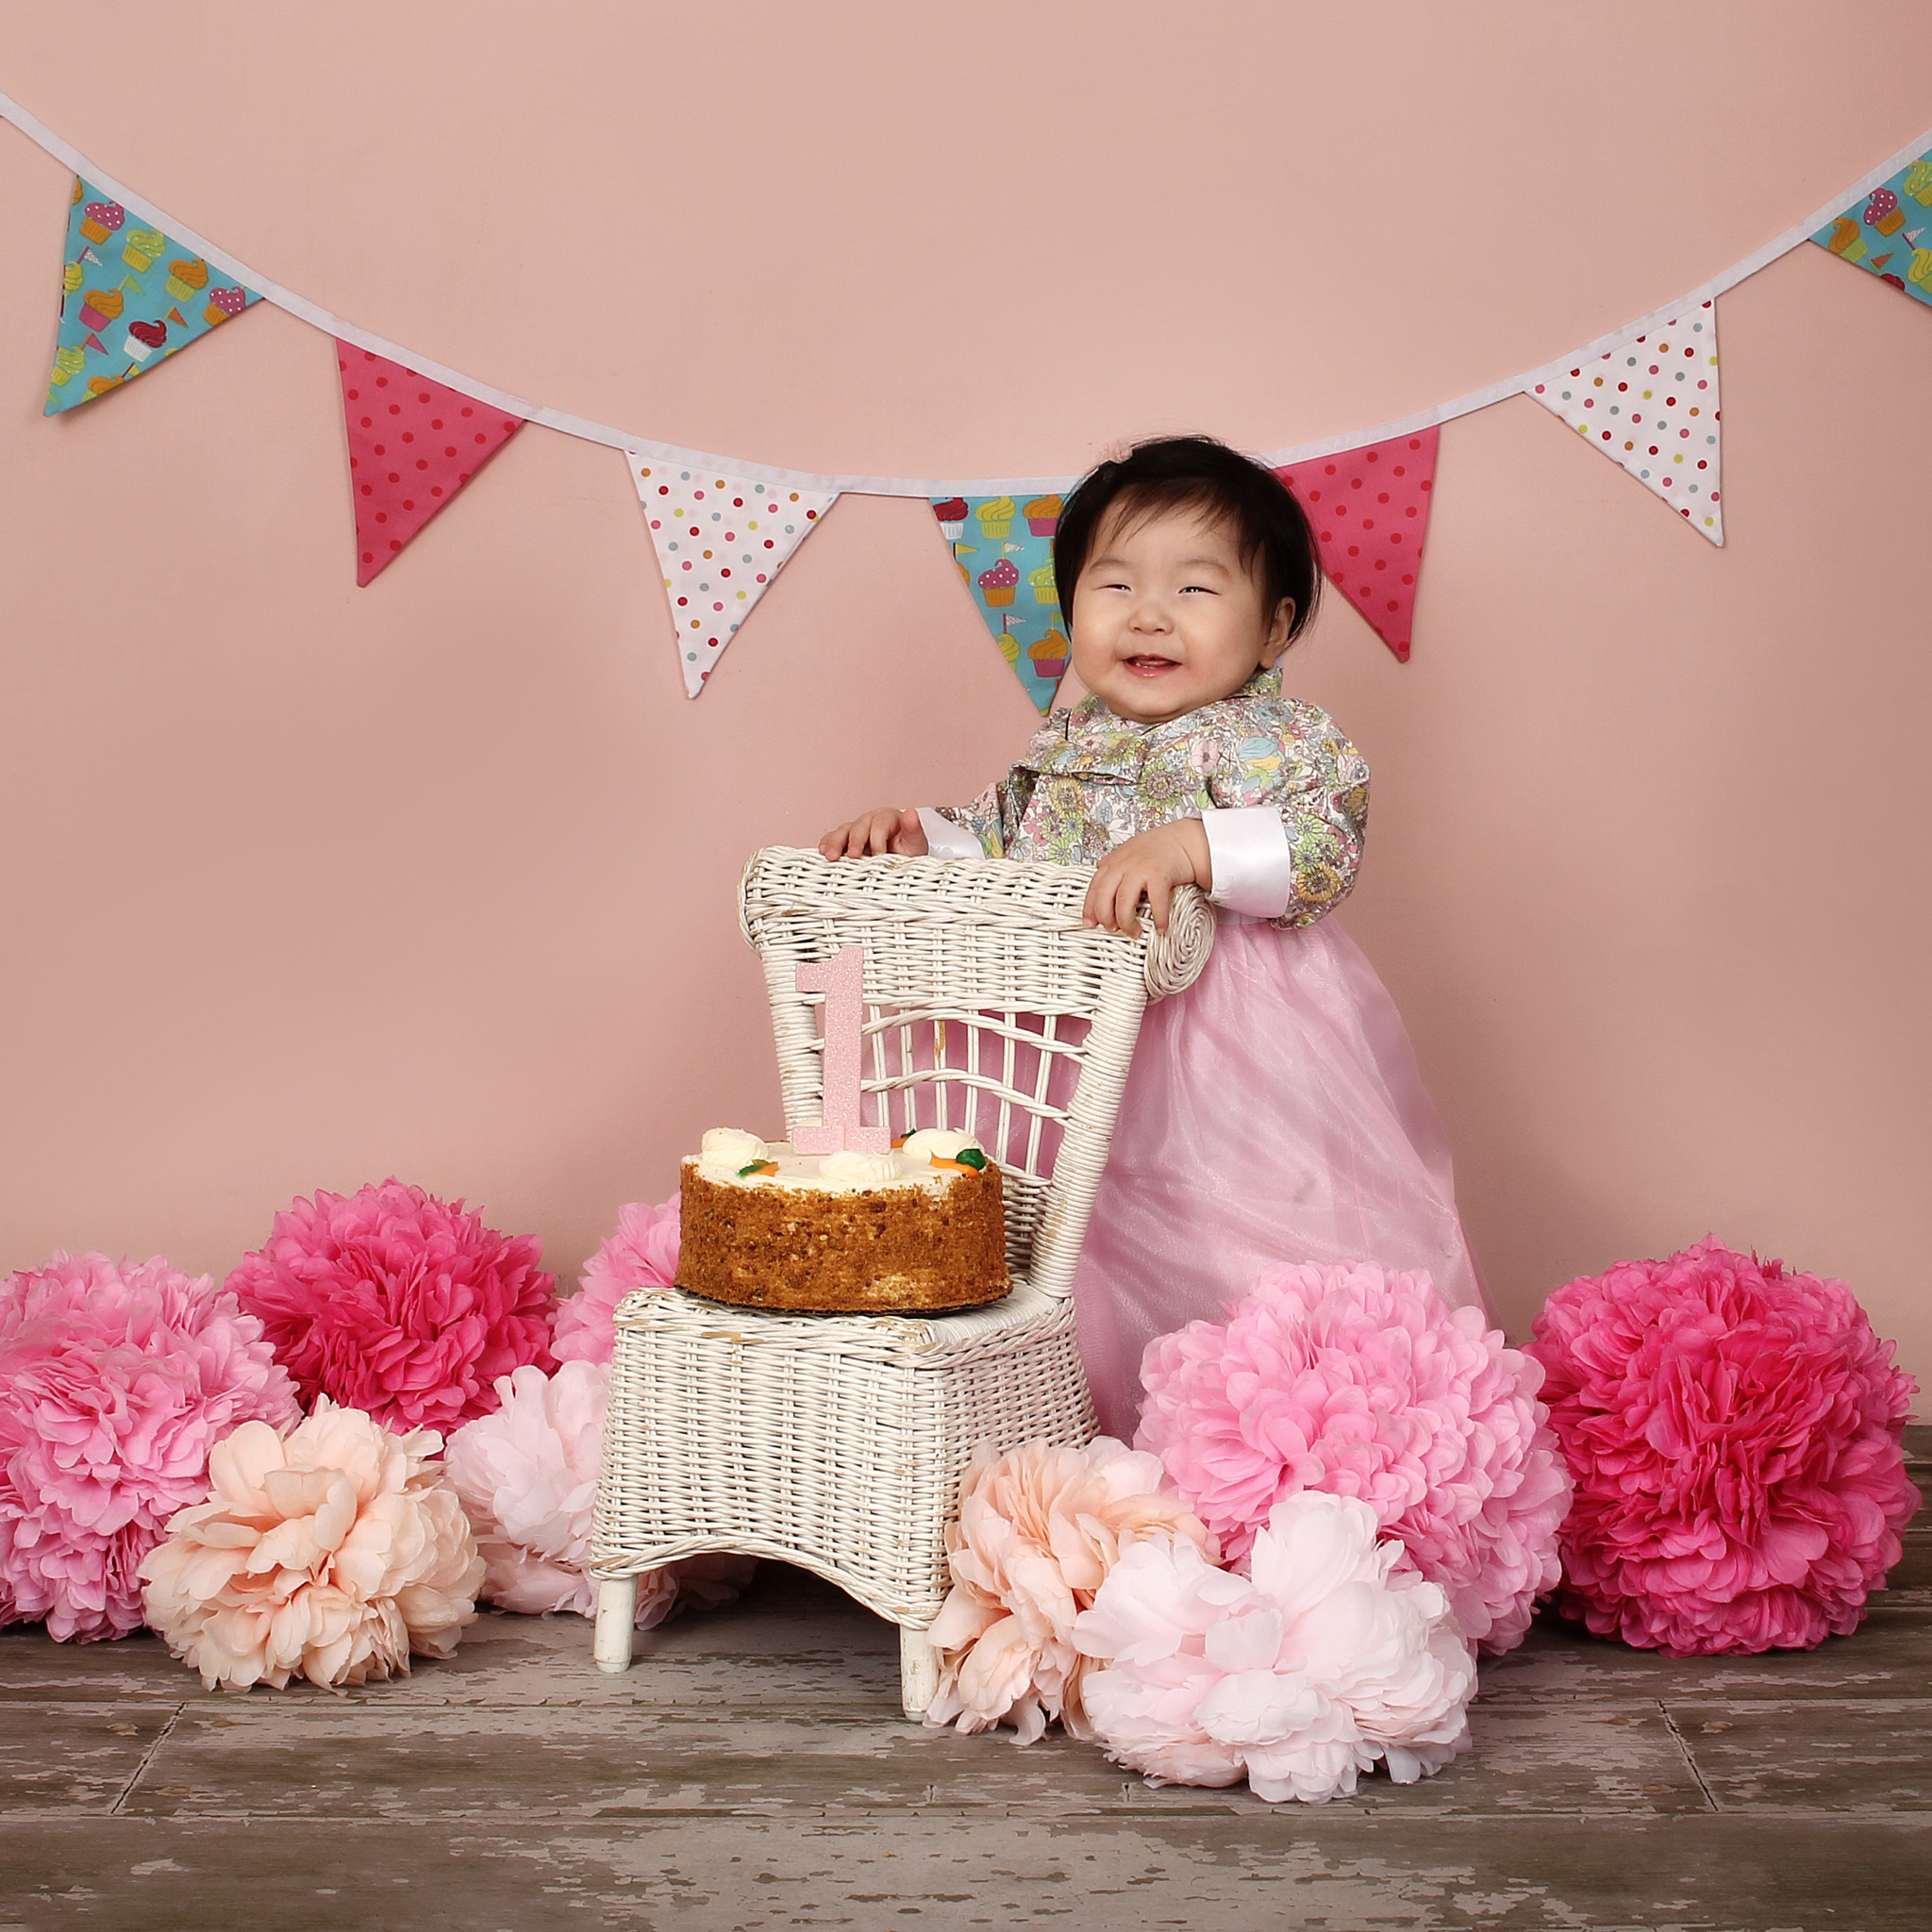 Banner & Pink Poofs w/White Wicker Chair On Pink